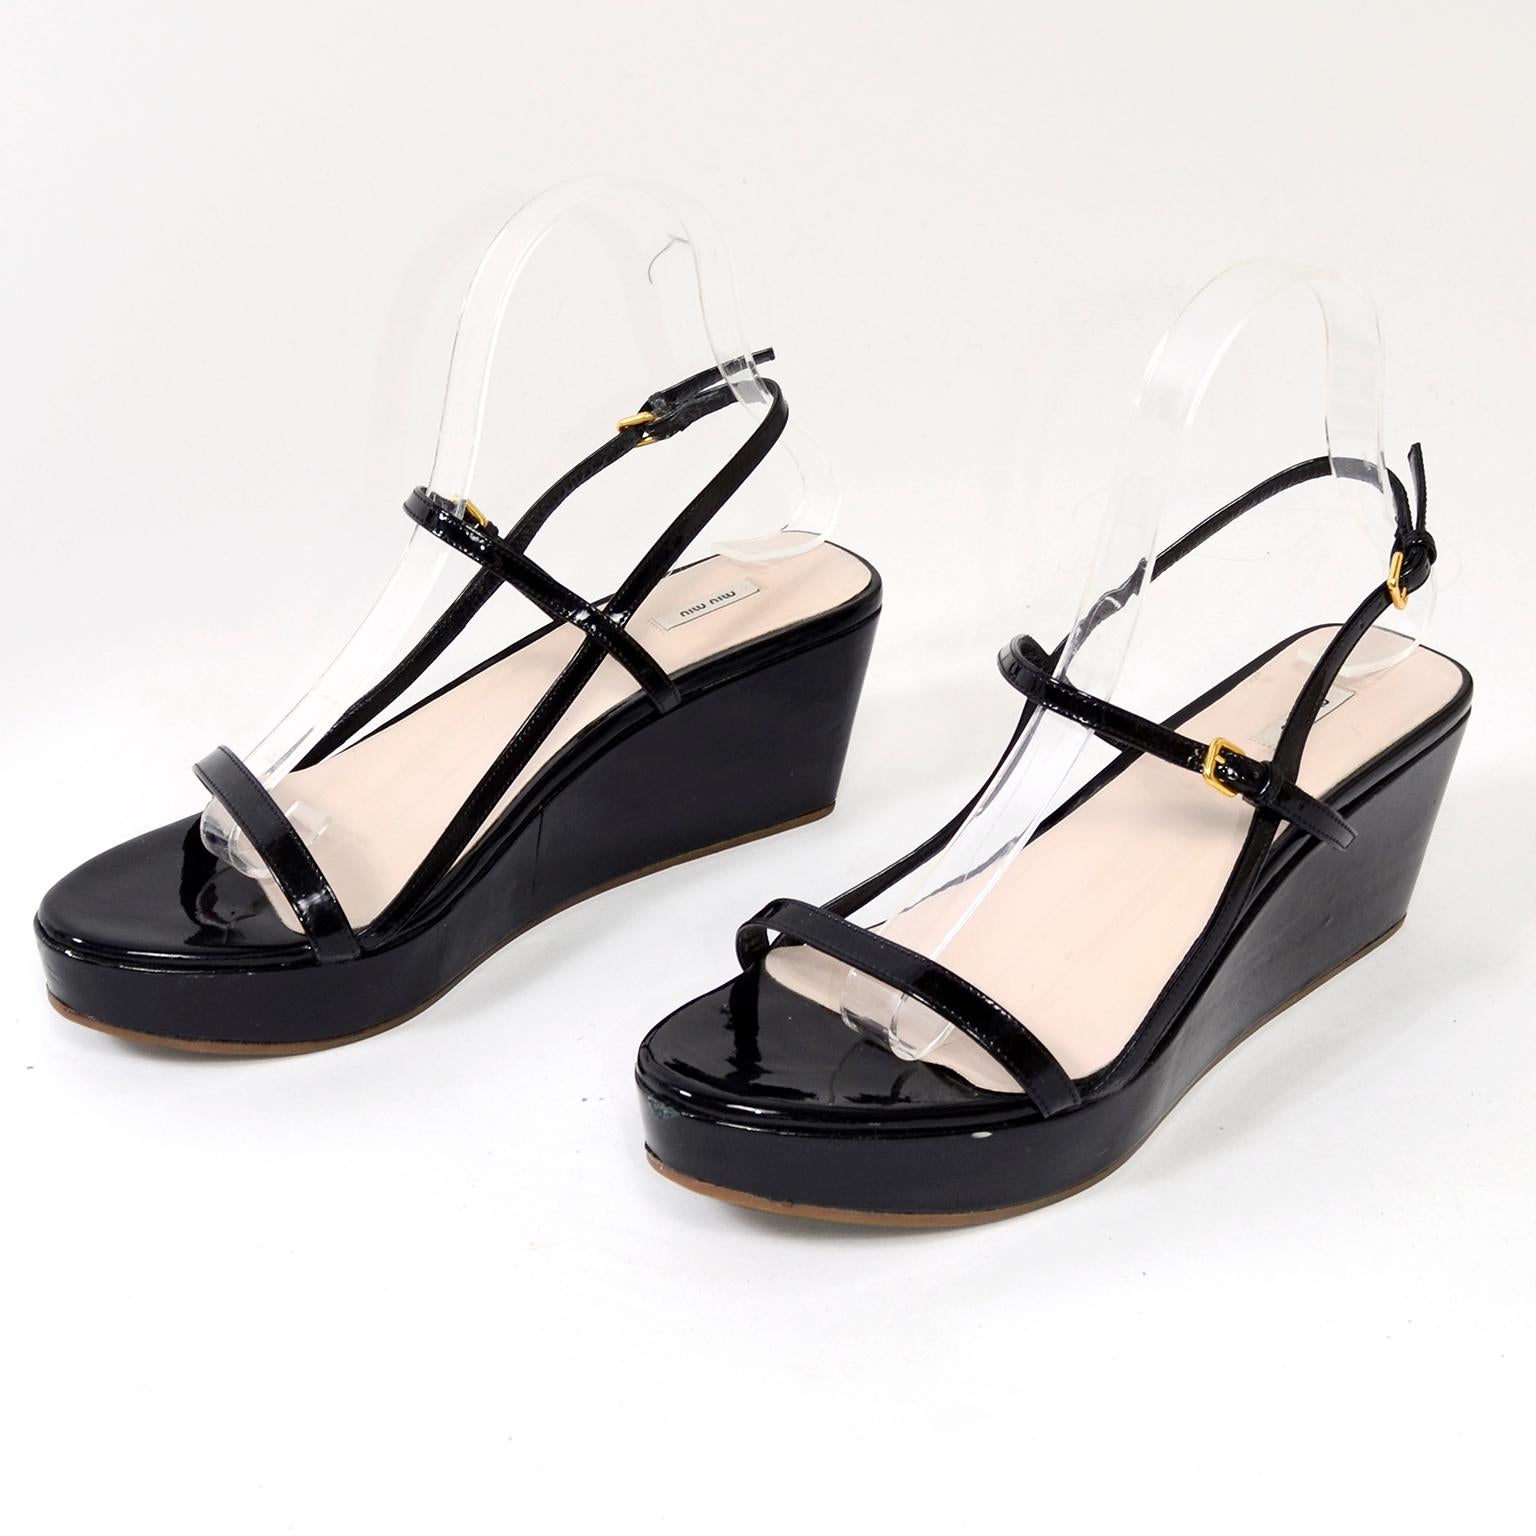 This is a great pair of strappy Miu Miu sandals with two buckling straps, one across the top of the foot and one behind the heel. There is another thin black strap that goes across the toes. This is a black patent leather platform shoe with a wedge